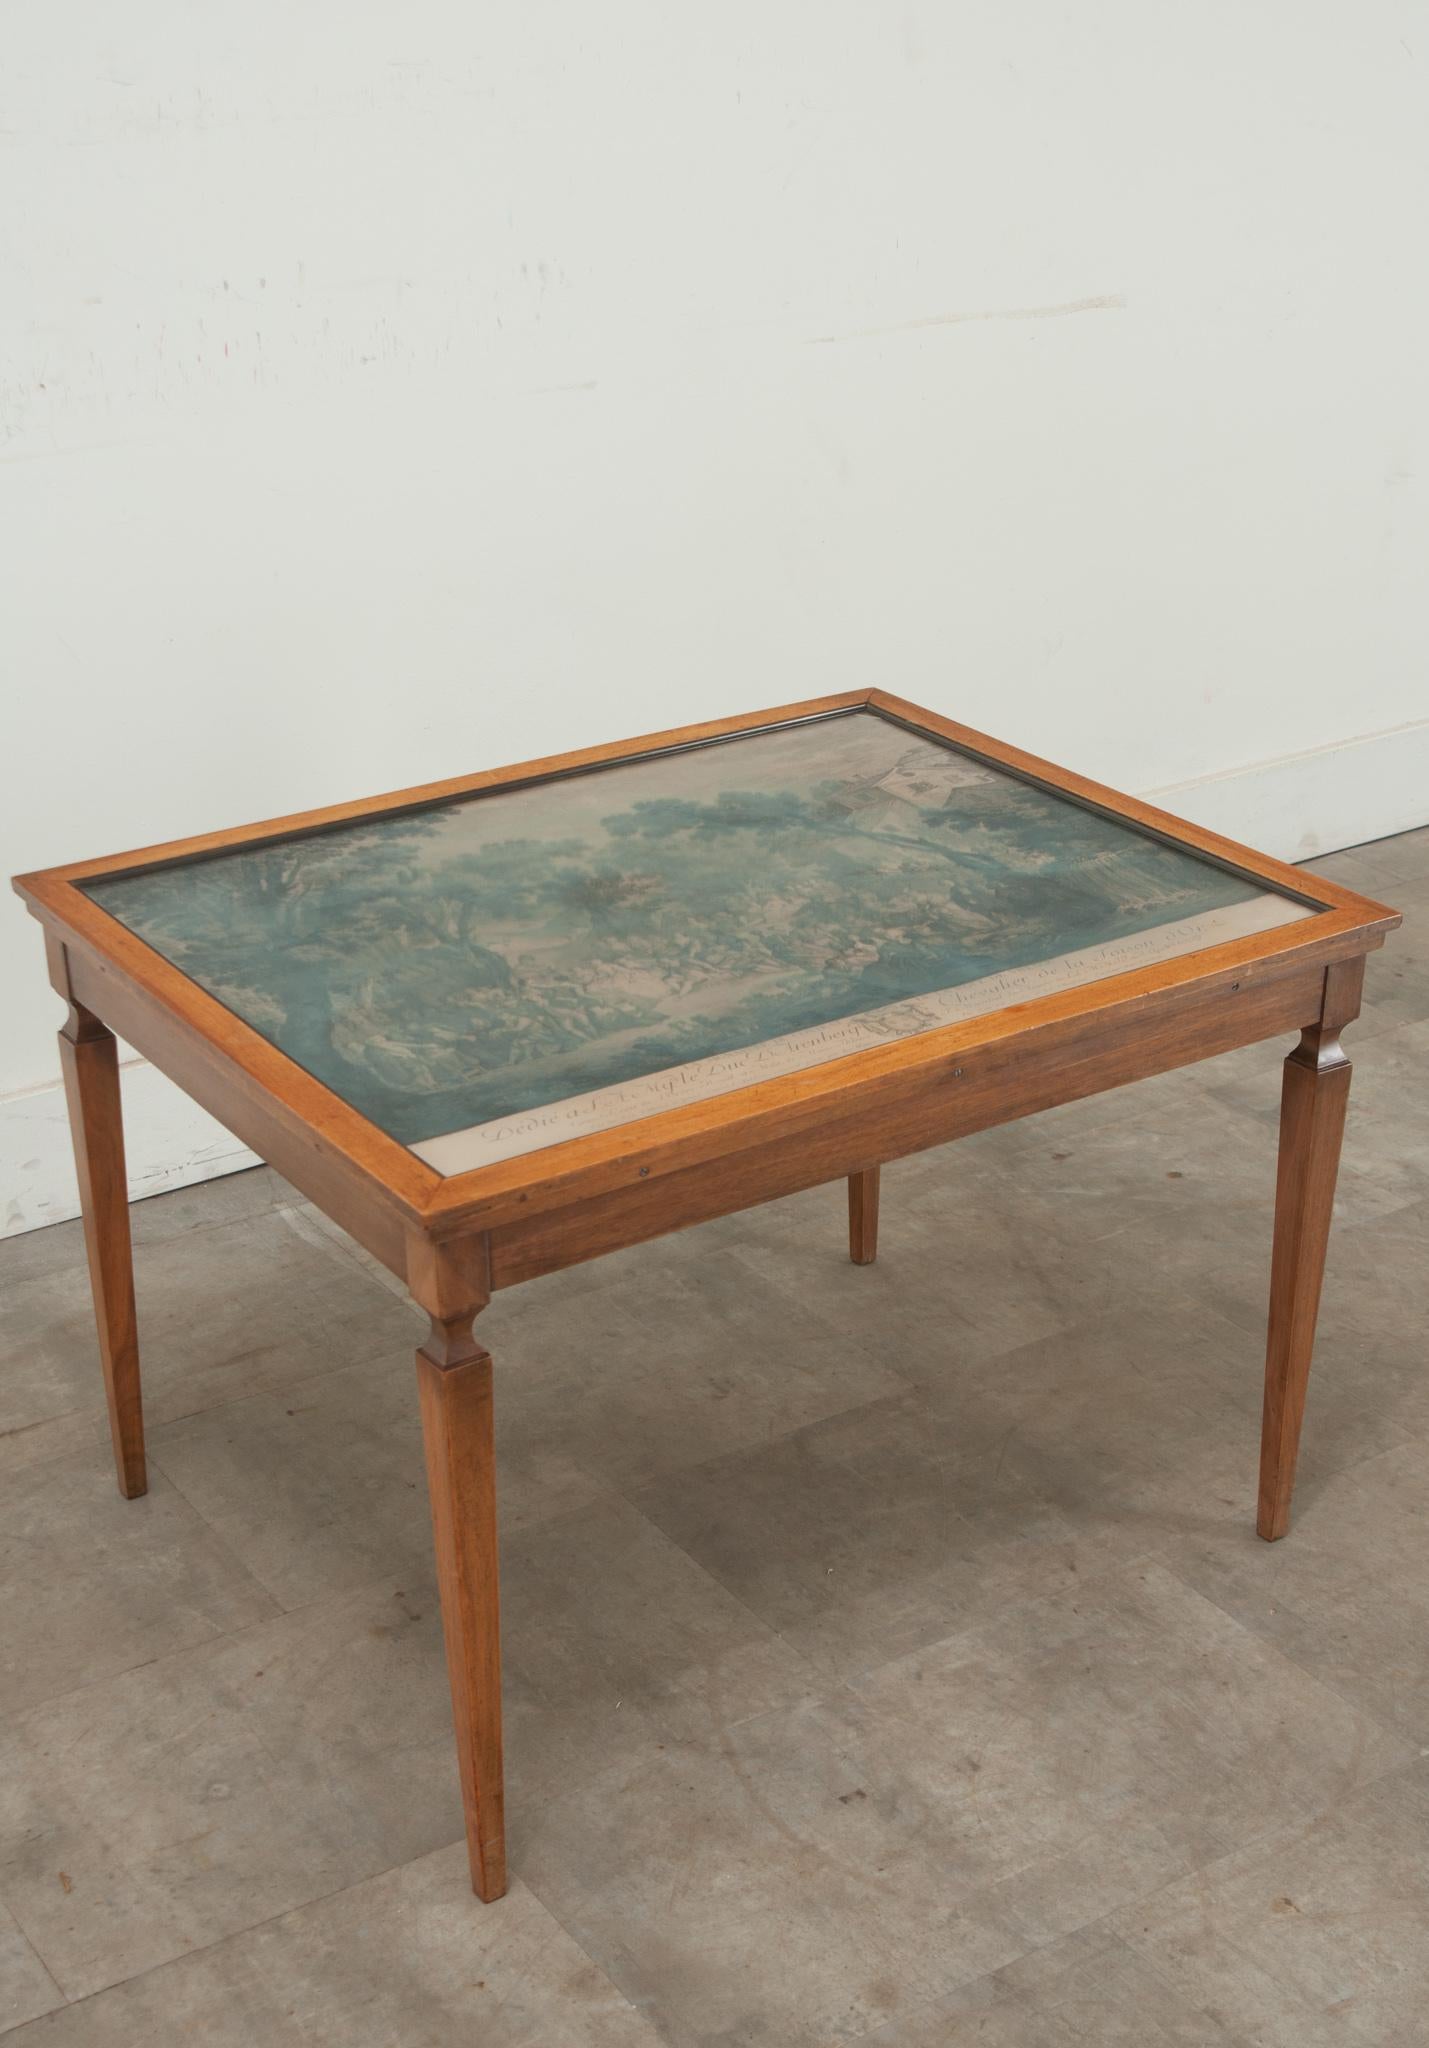 A vintage coffee table with a mahogany frame and glass top. This vintage table features a French lithograph underneath the glass that can be changed out to display the art of your choice. The top is raised on four tapered legs. Cleaned and polished